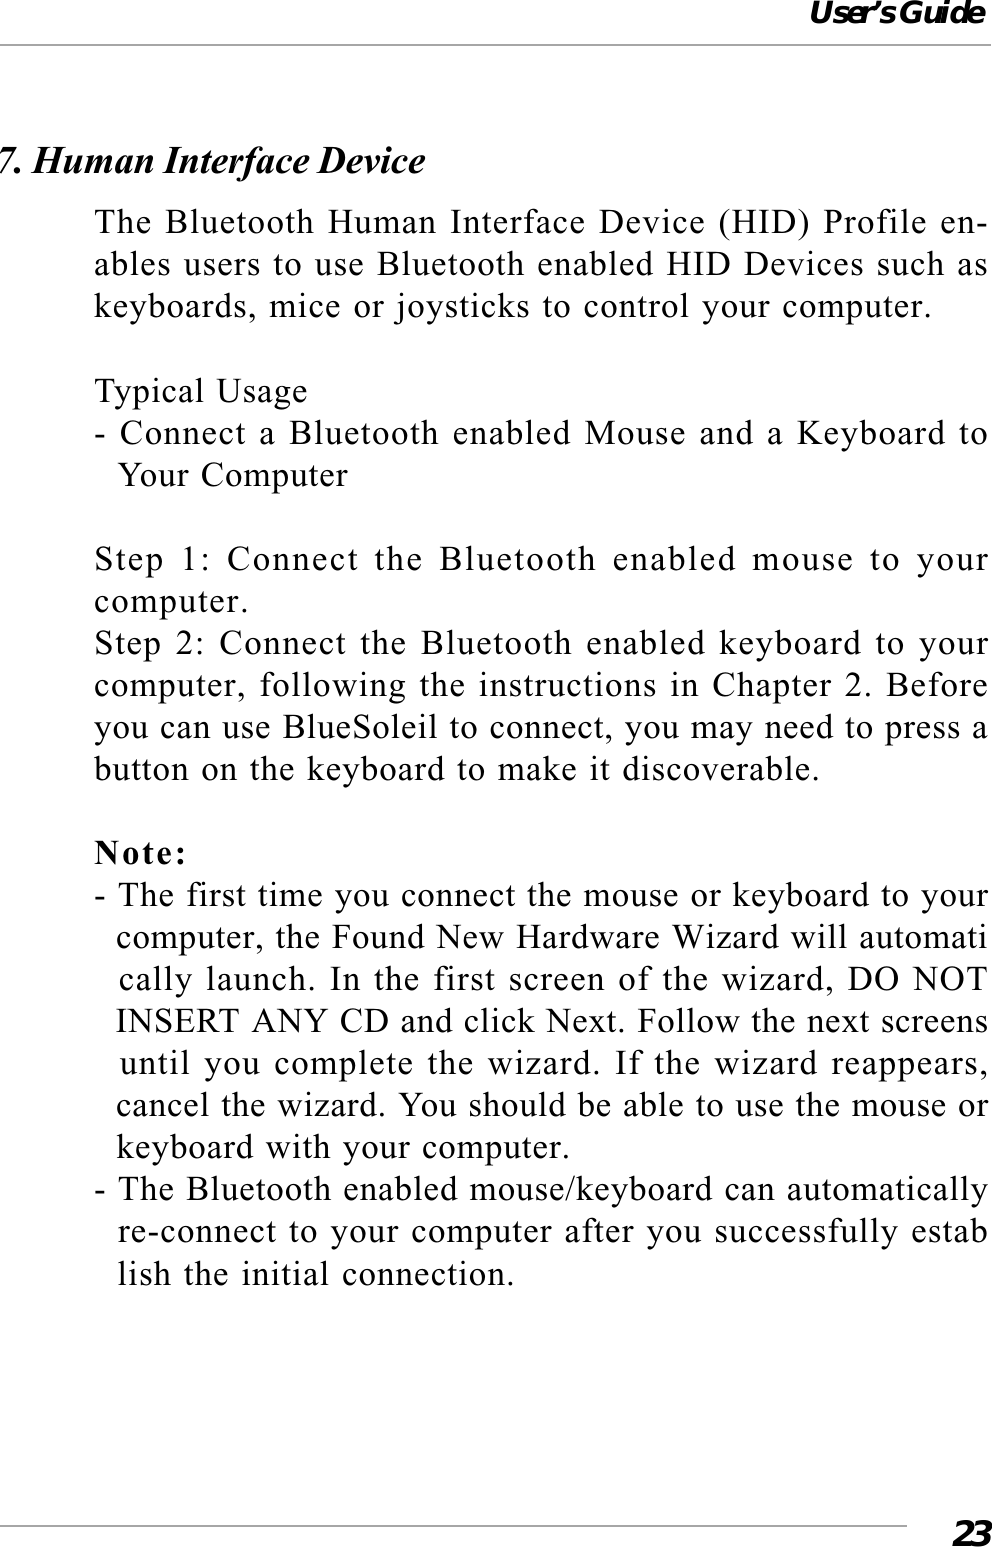 User’s Guide237. Human Interface DeviceThe Bluetooth Human Interface Device (HID) Profile en-ables users to use Bluetooth enabled HID Devices such askeyboards, mice or joysticks to control your computer.Typical Usage- Connect a Bluetooth enabled Mouse and a Keyboard to  Your ComputerStep 1: Connect the Bluetooth enabled mouse to yourcomputer.Step 2: Connect the Bluetooth enabled keyboard to yourcomputer, following the instructions in Chapter 2. Beforeyou can use BlueSoleil to connect, you may need to press abutton on the keyboard to make it discoverable.Note:- The first time you connect the mouse or keyboard to your  computer, the Found New Hardware Wizard will automati  cally launch. In the first screen of the wizard, DO NOT  INSERT ANY CD and click Next. Follow the next screens  until you complete the wizard. If the wizard reappears,  cancel the wizard. You should be able to use the mouse or  keyboard with your computer.- The Bluetooth enabled mouse/keyboard can automatically  re-connect to your computer after you successfully estab  lish the initial connection.